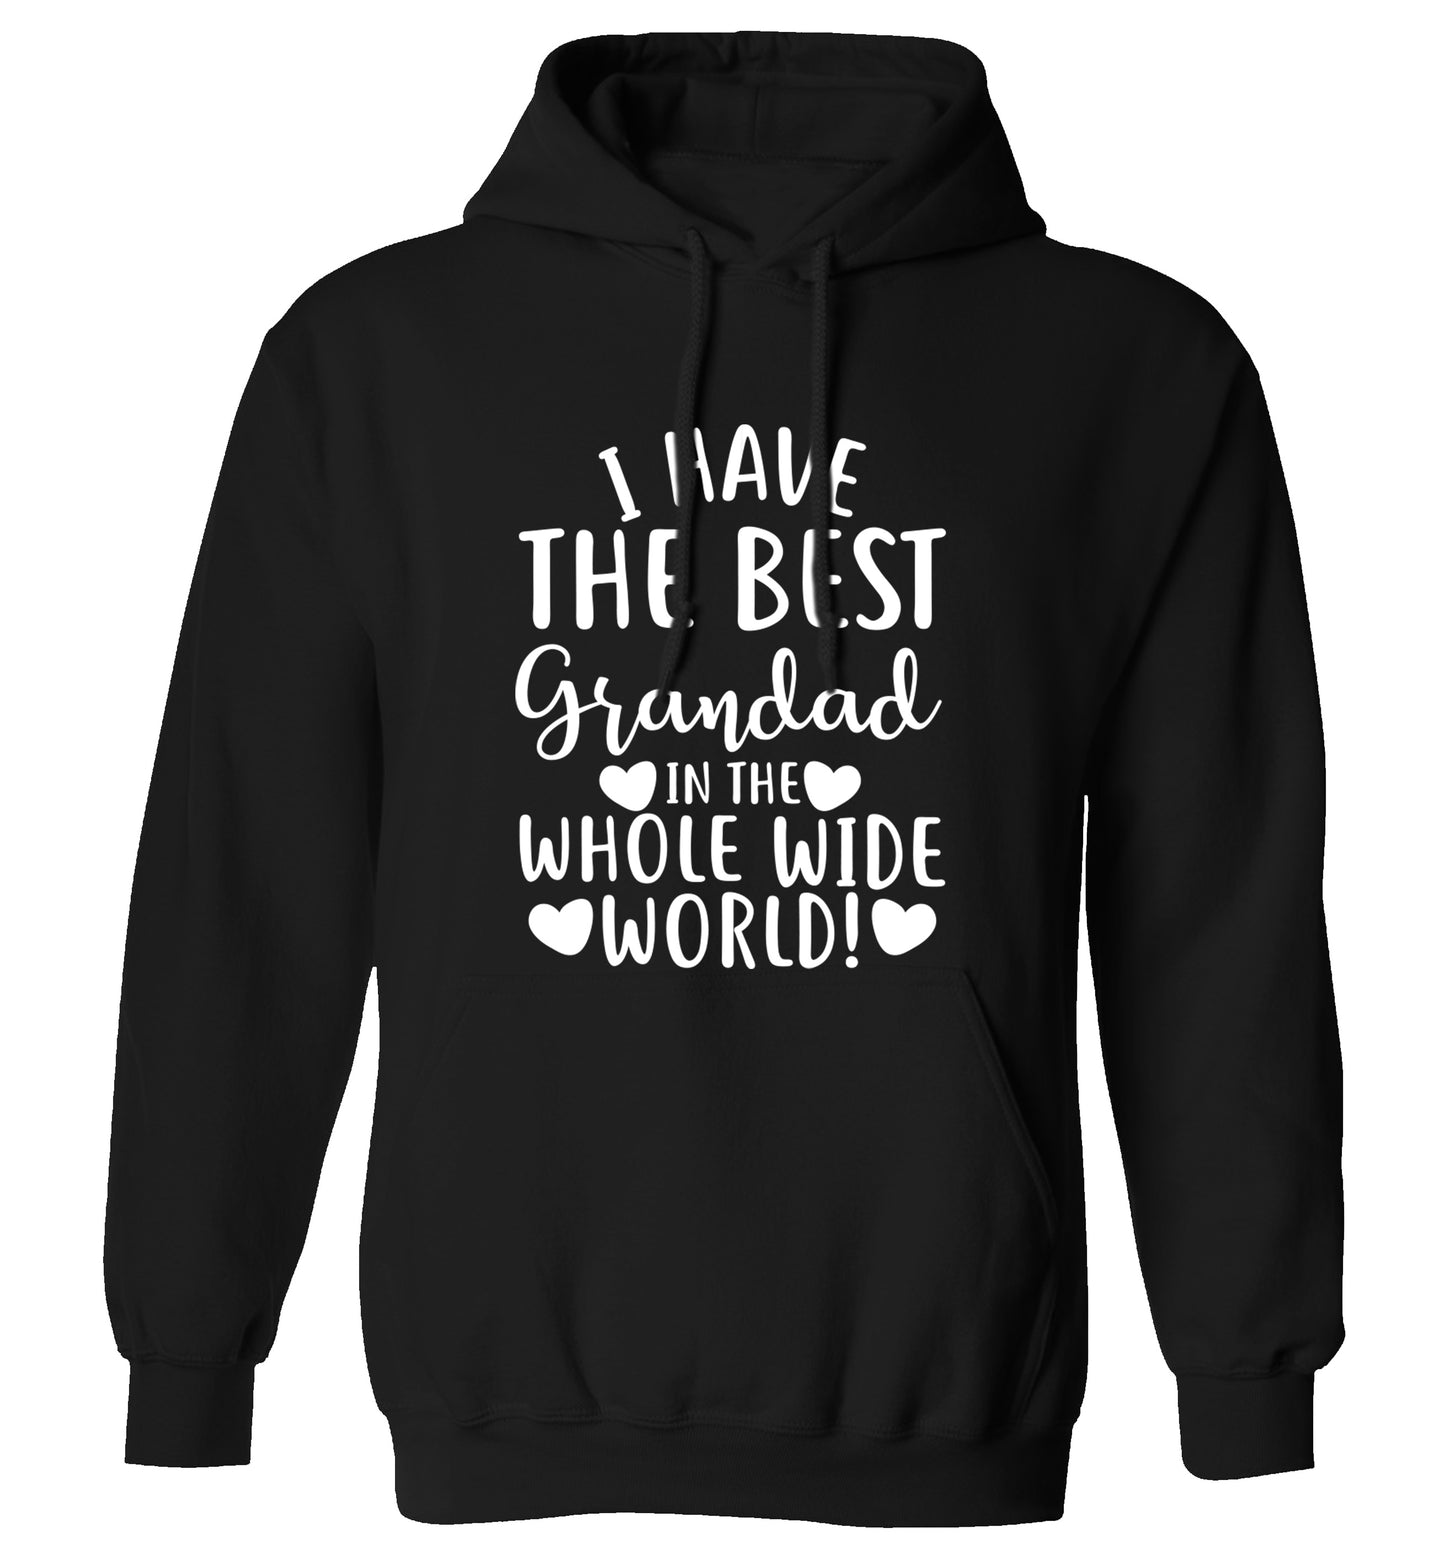 I have the best grandad in the whole wide world! adults unisex black hoodie 2XL